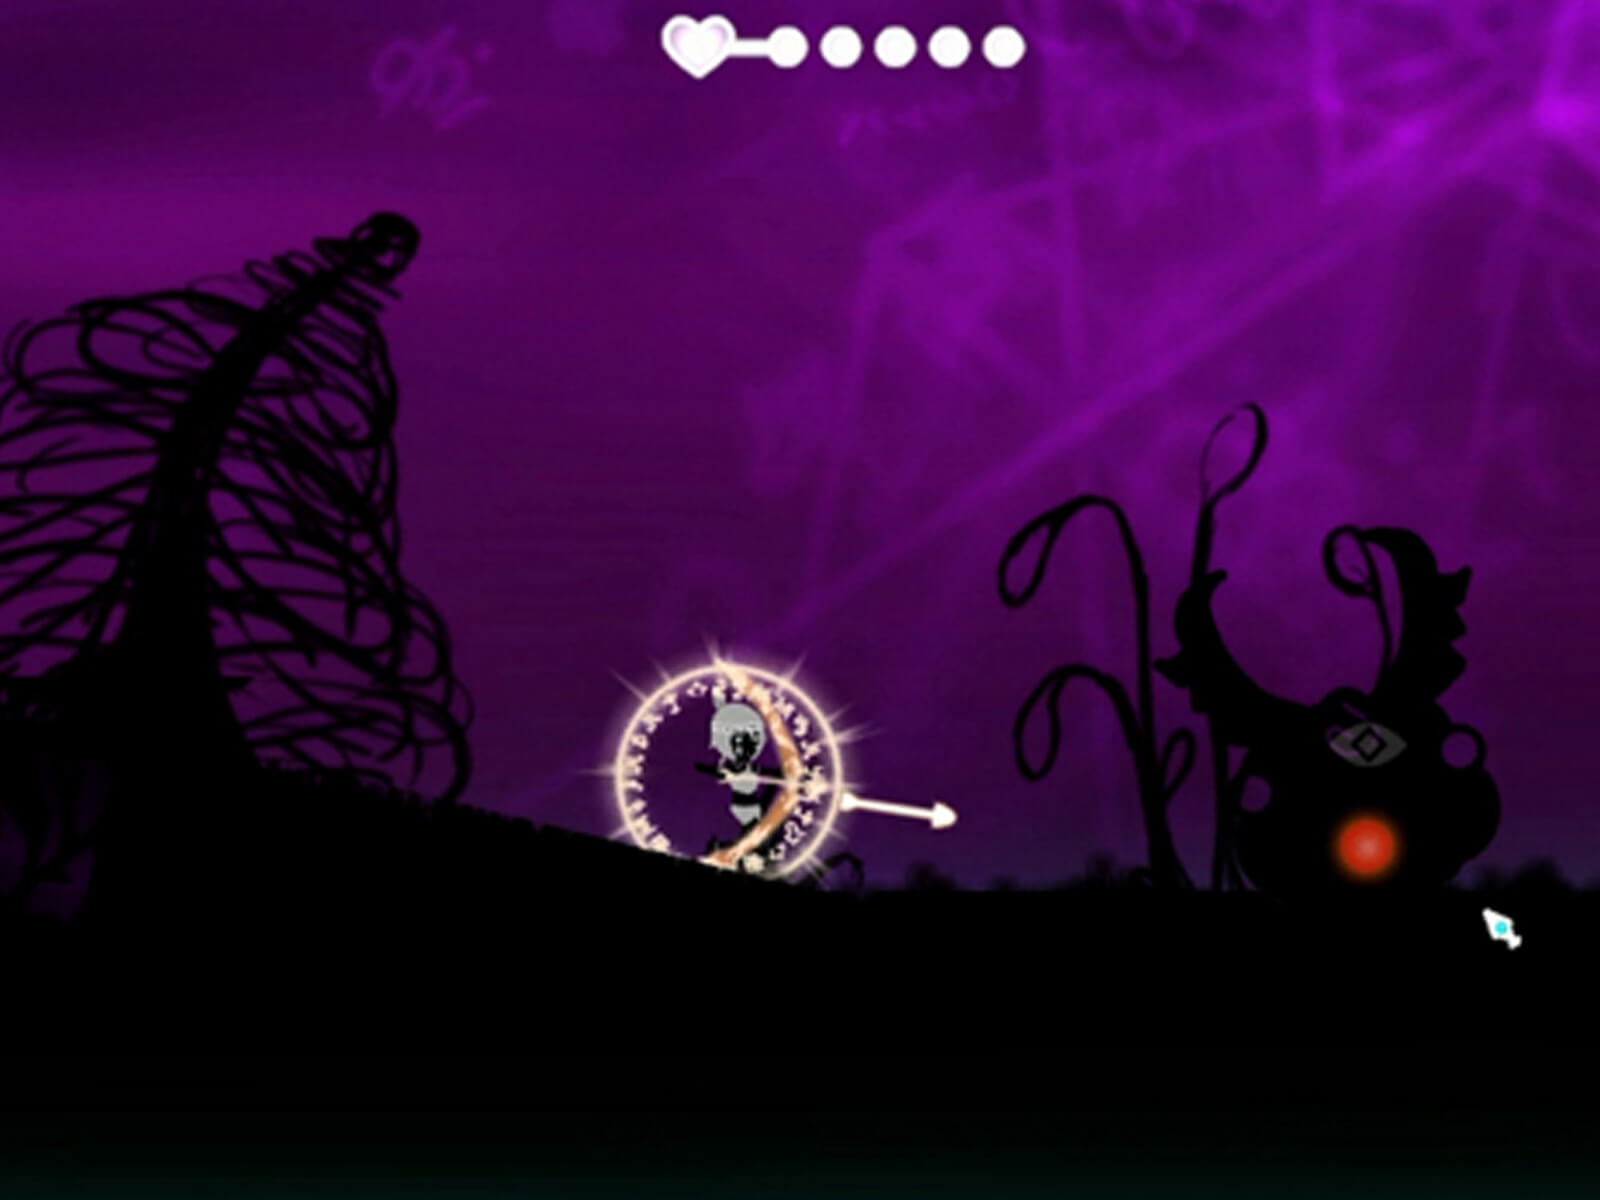 Screenshot of character Iris surrounded by a magical rune, aiming in arrow in a shadowy world with a purple background